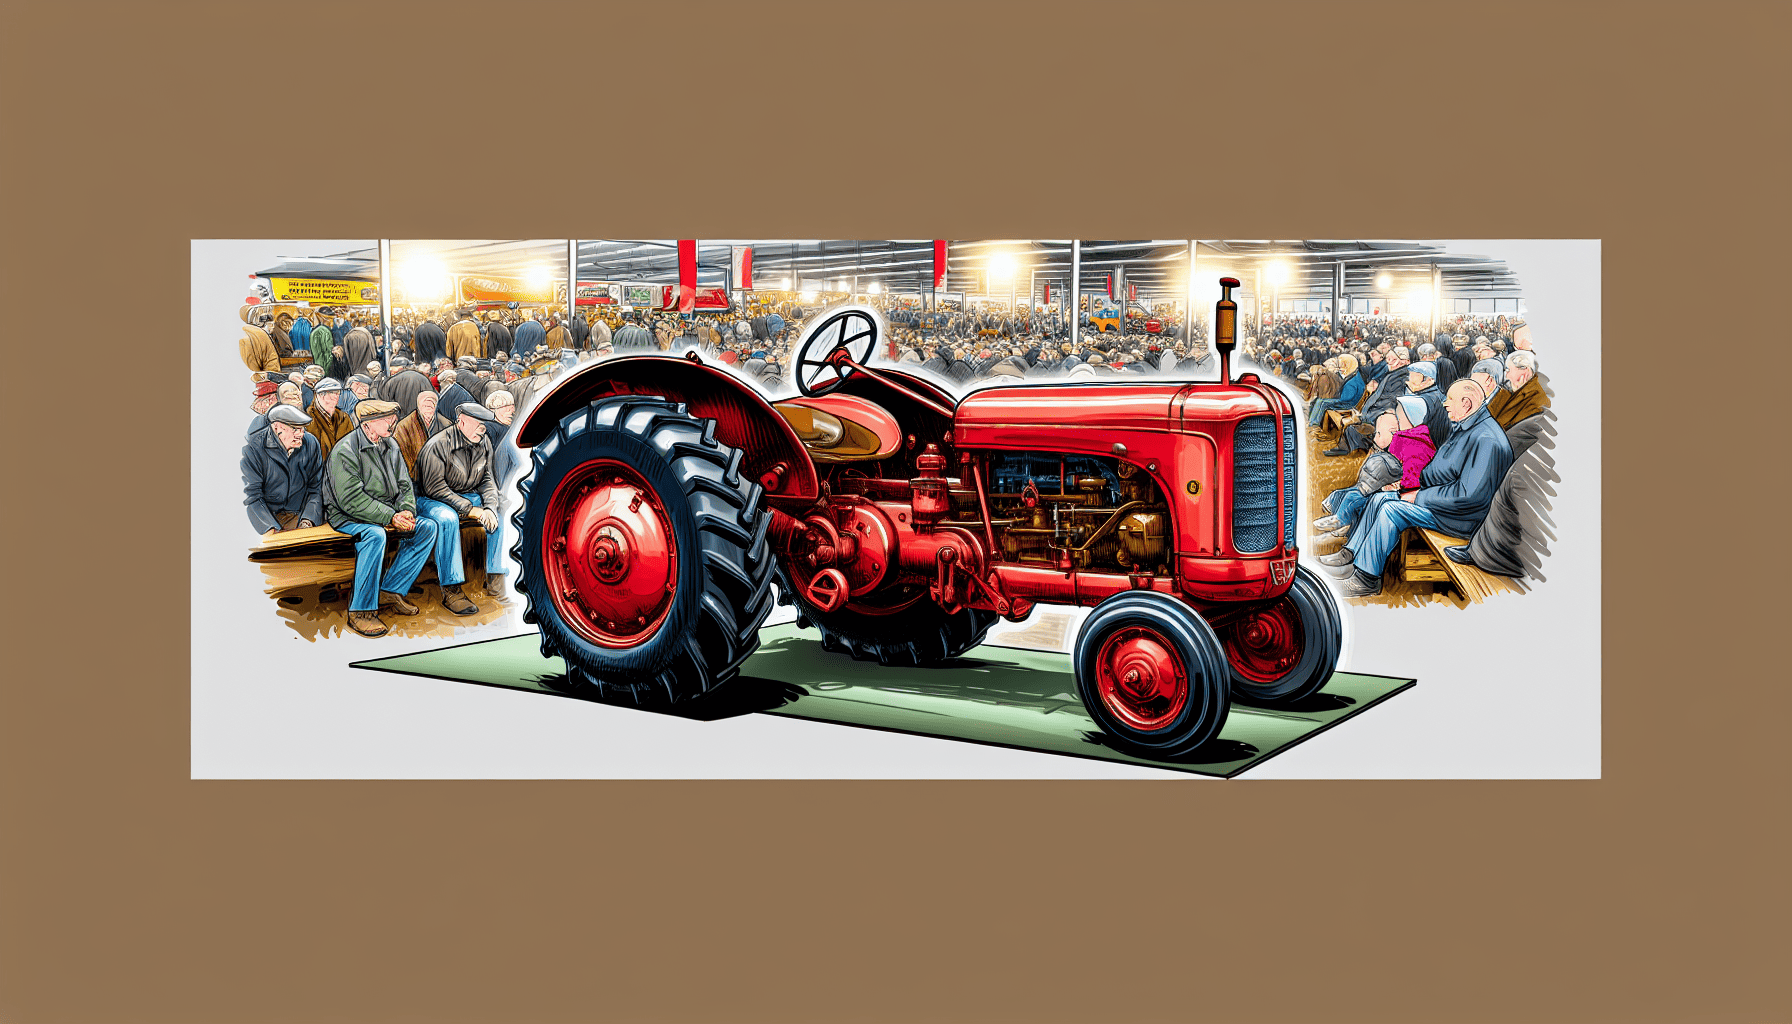 A rare and unique classic tractor showcased at an exhibition